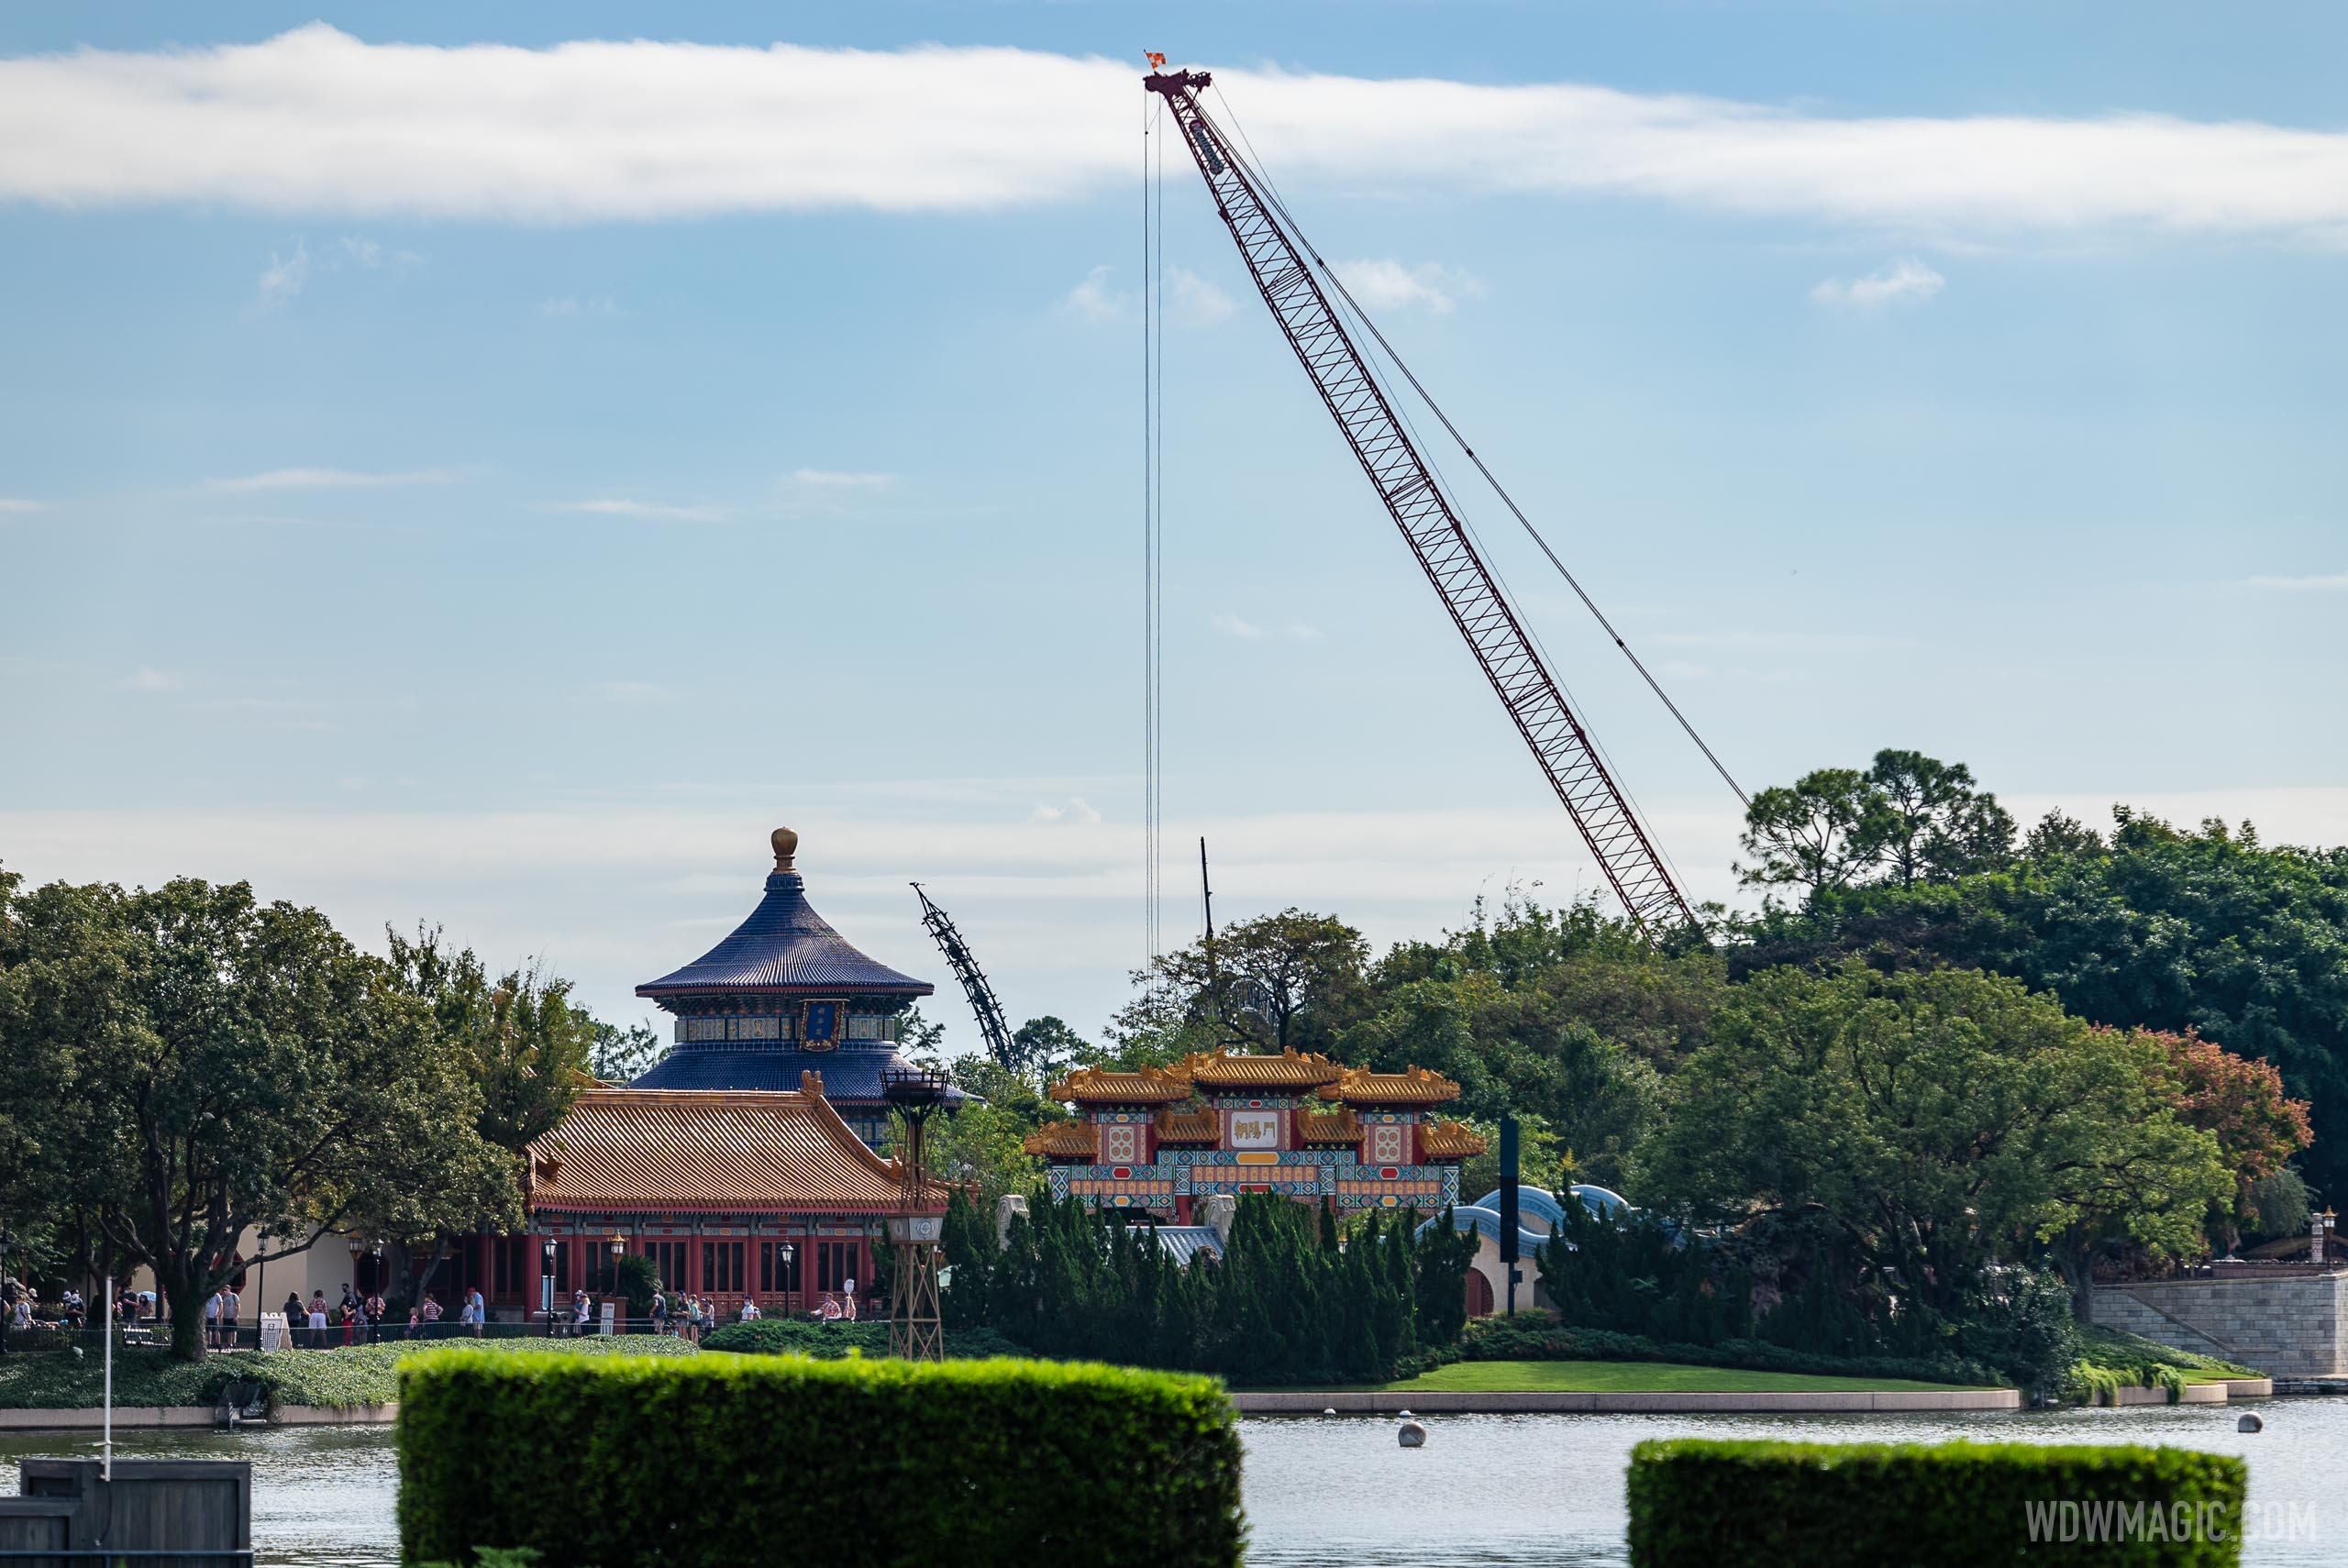 Vast size of Harmonious barges apparent in pictures from World Showcase